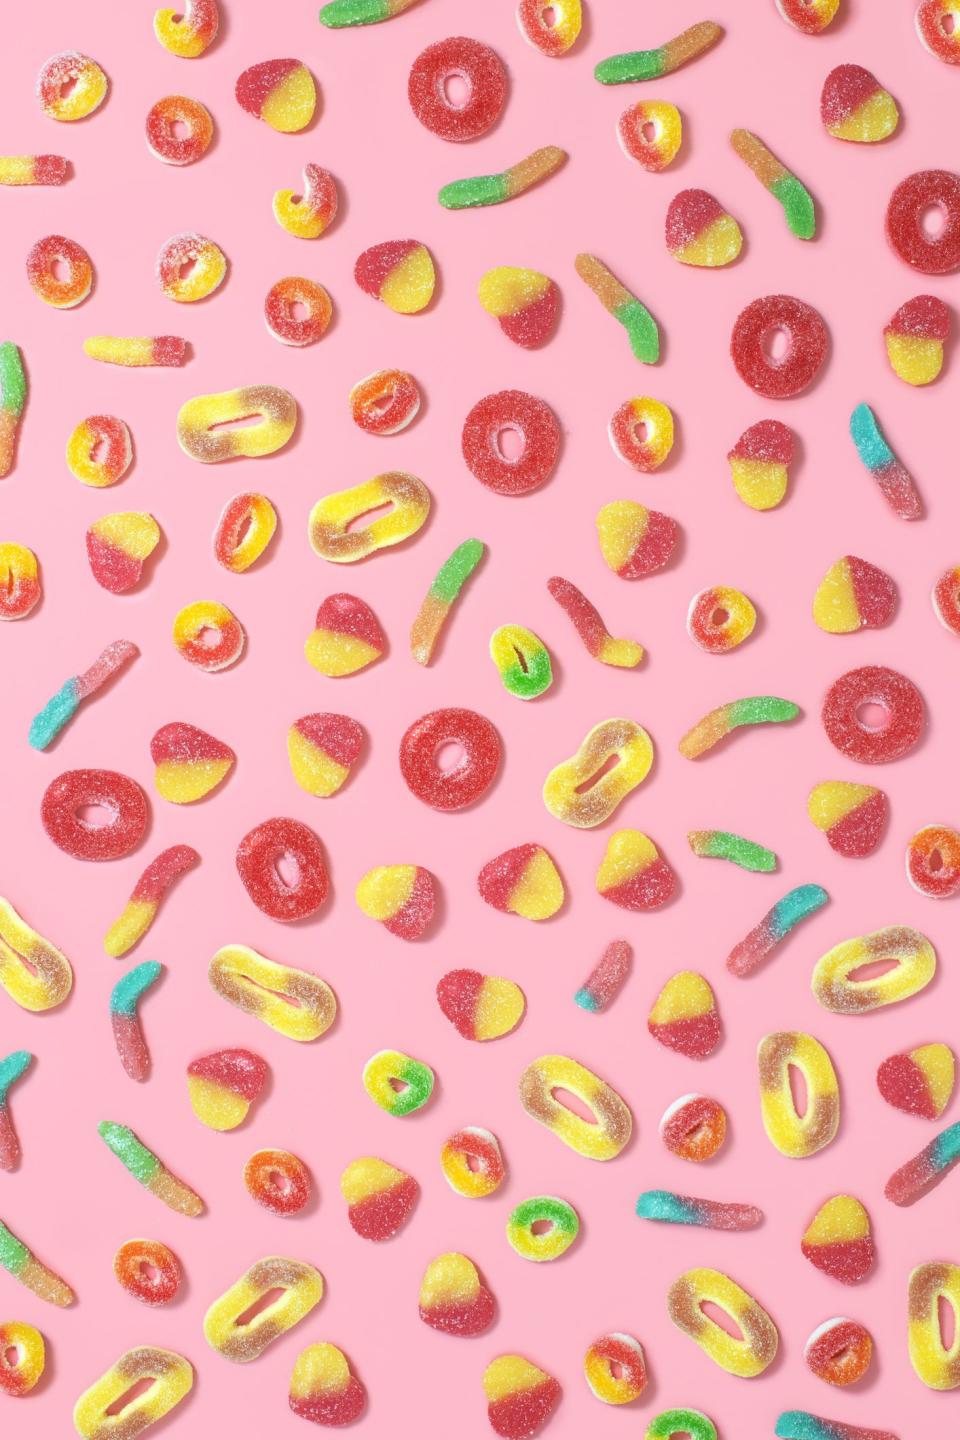 Yes, You *Can* Find Vegan Candy In Your Local Grocery And Drug Store